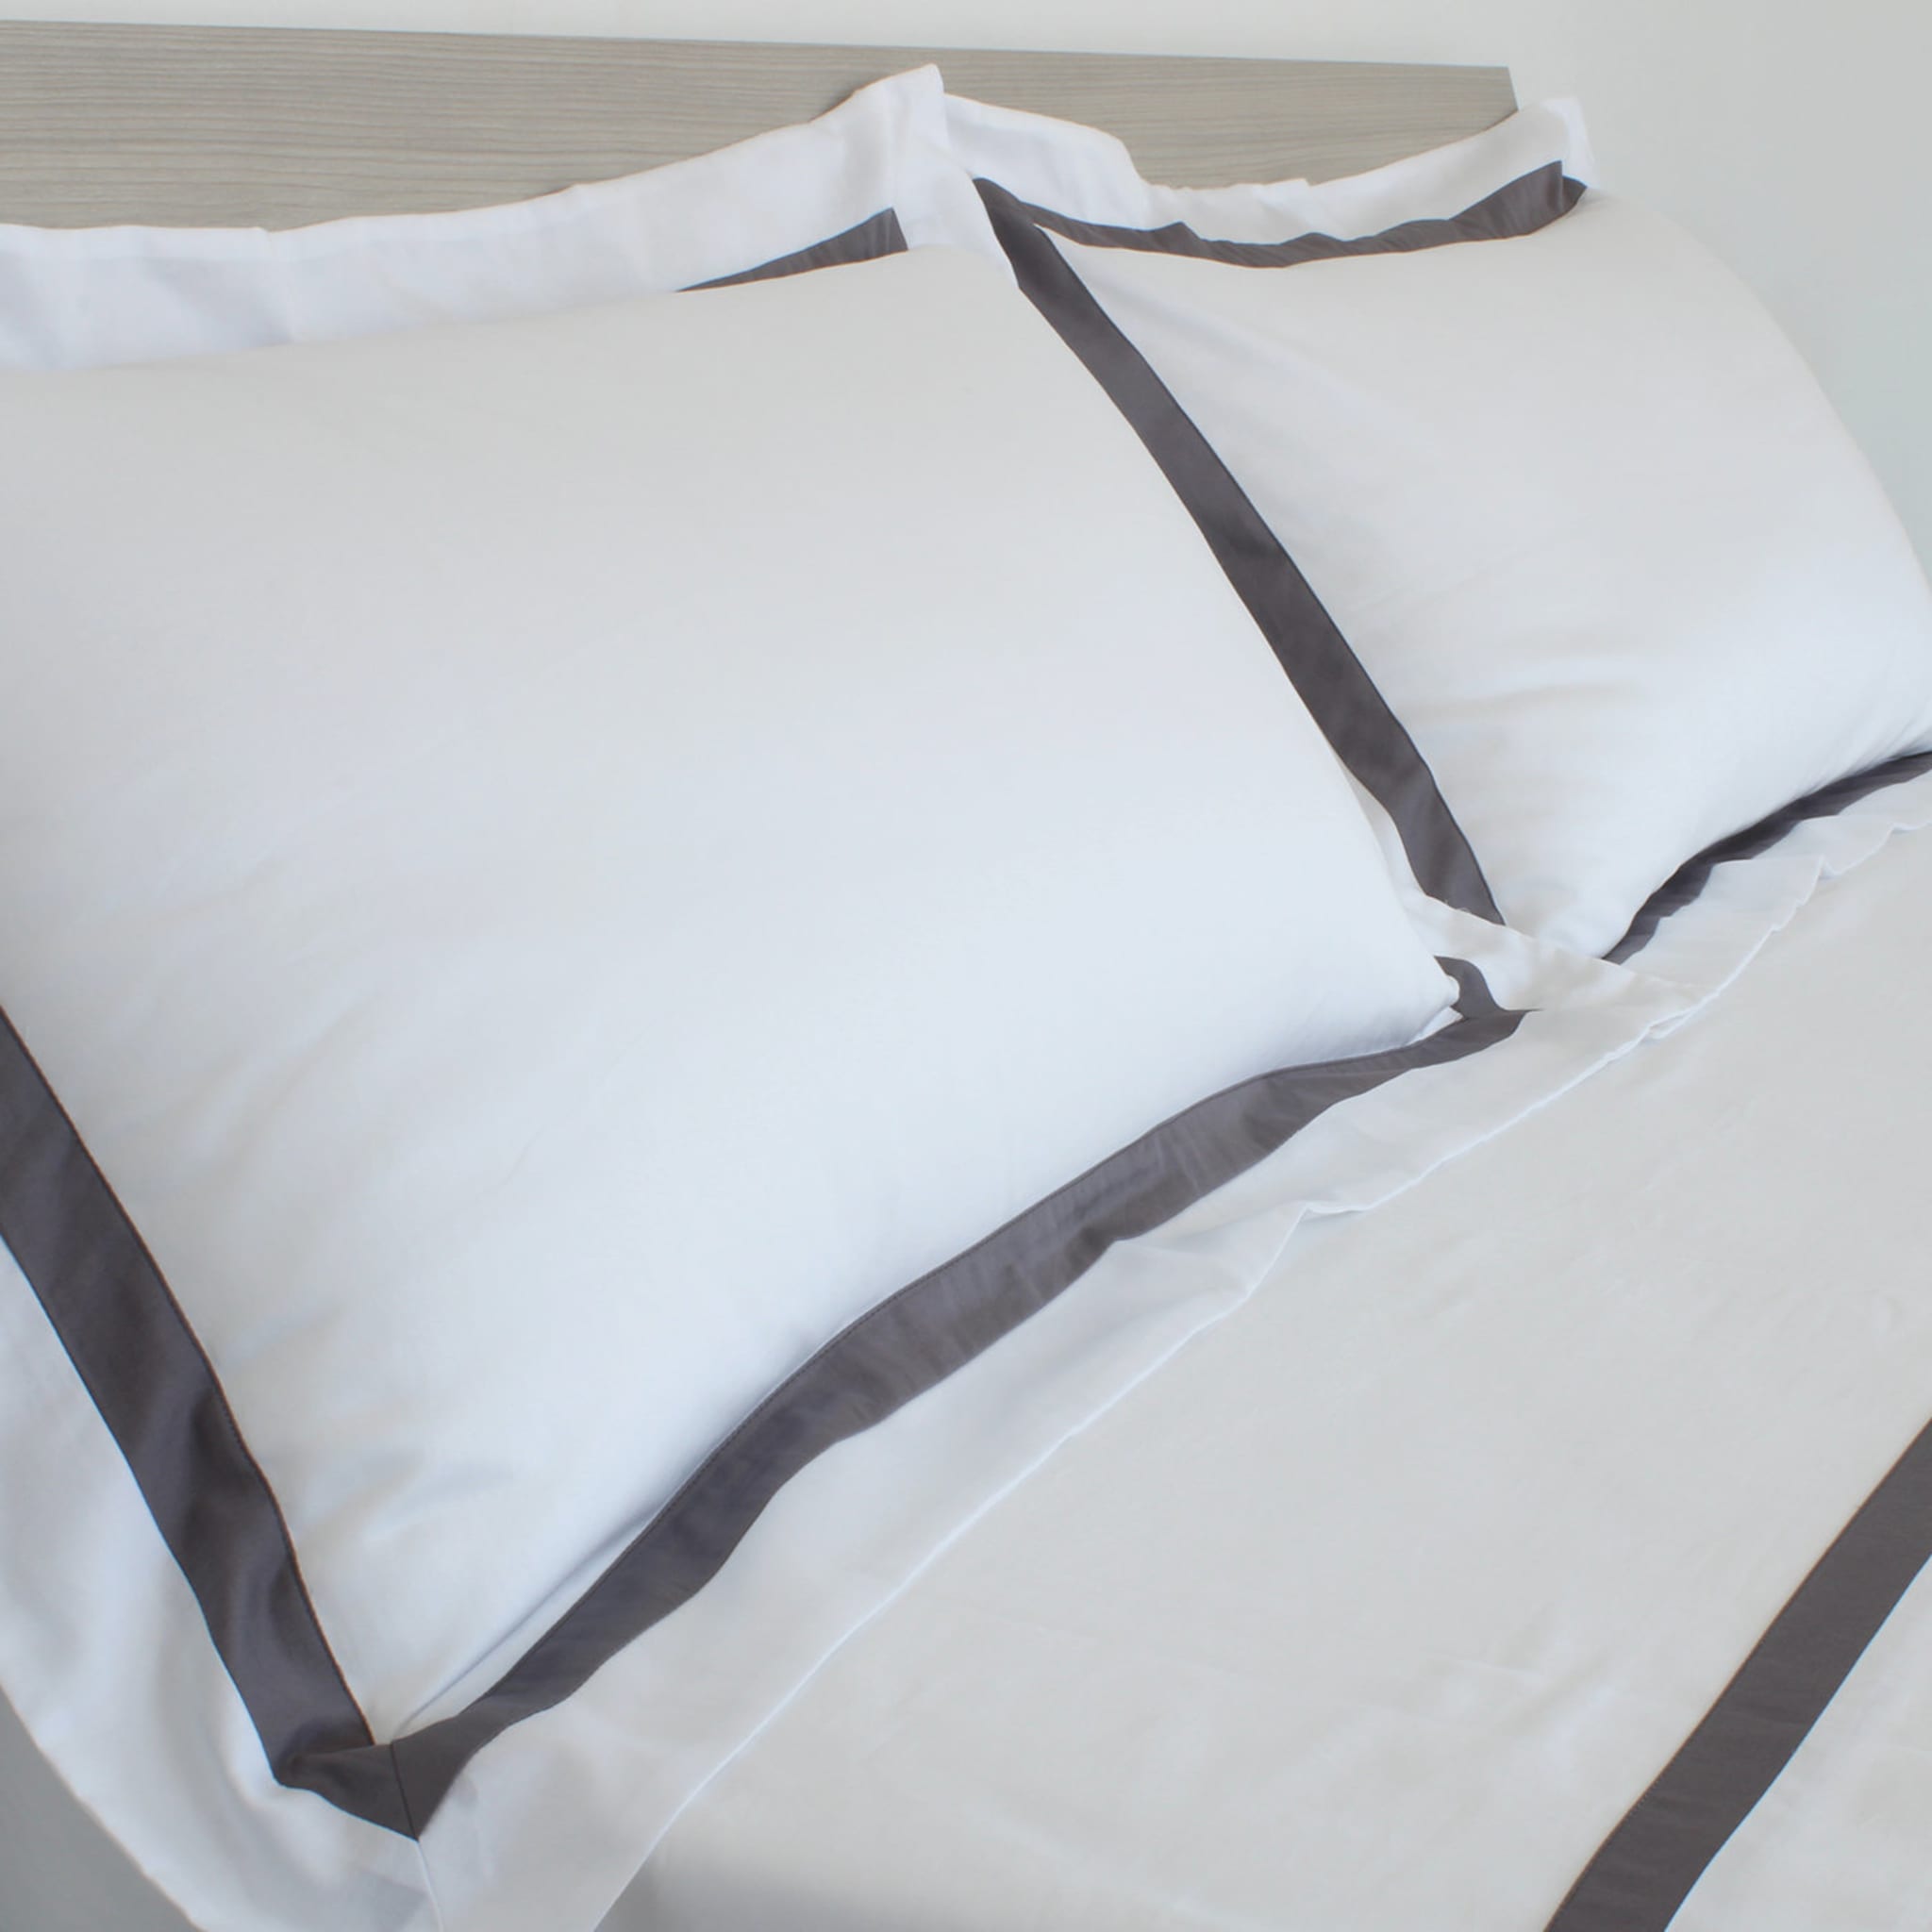 Purity King Size Sheet Set with Pillowcases - Alternative view 2